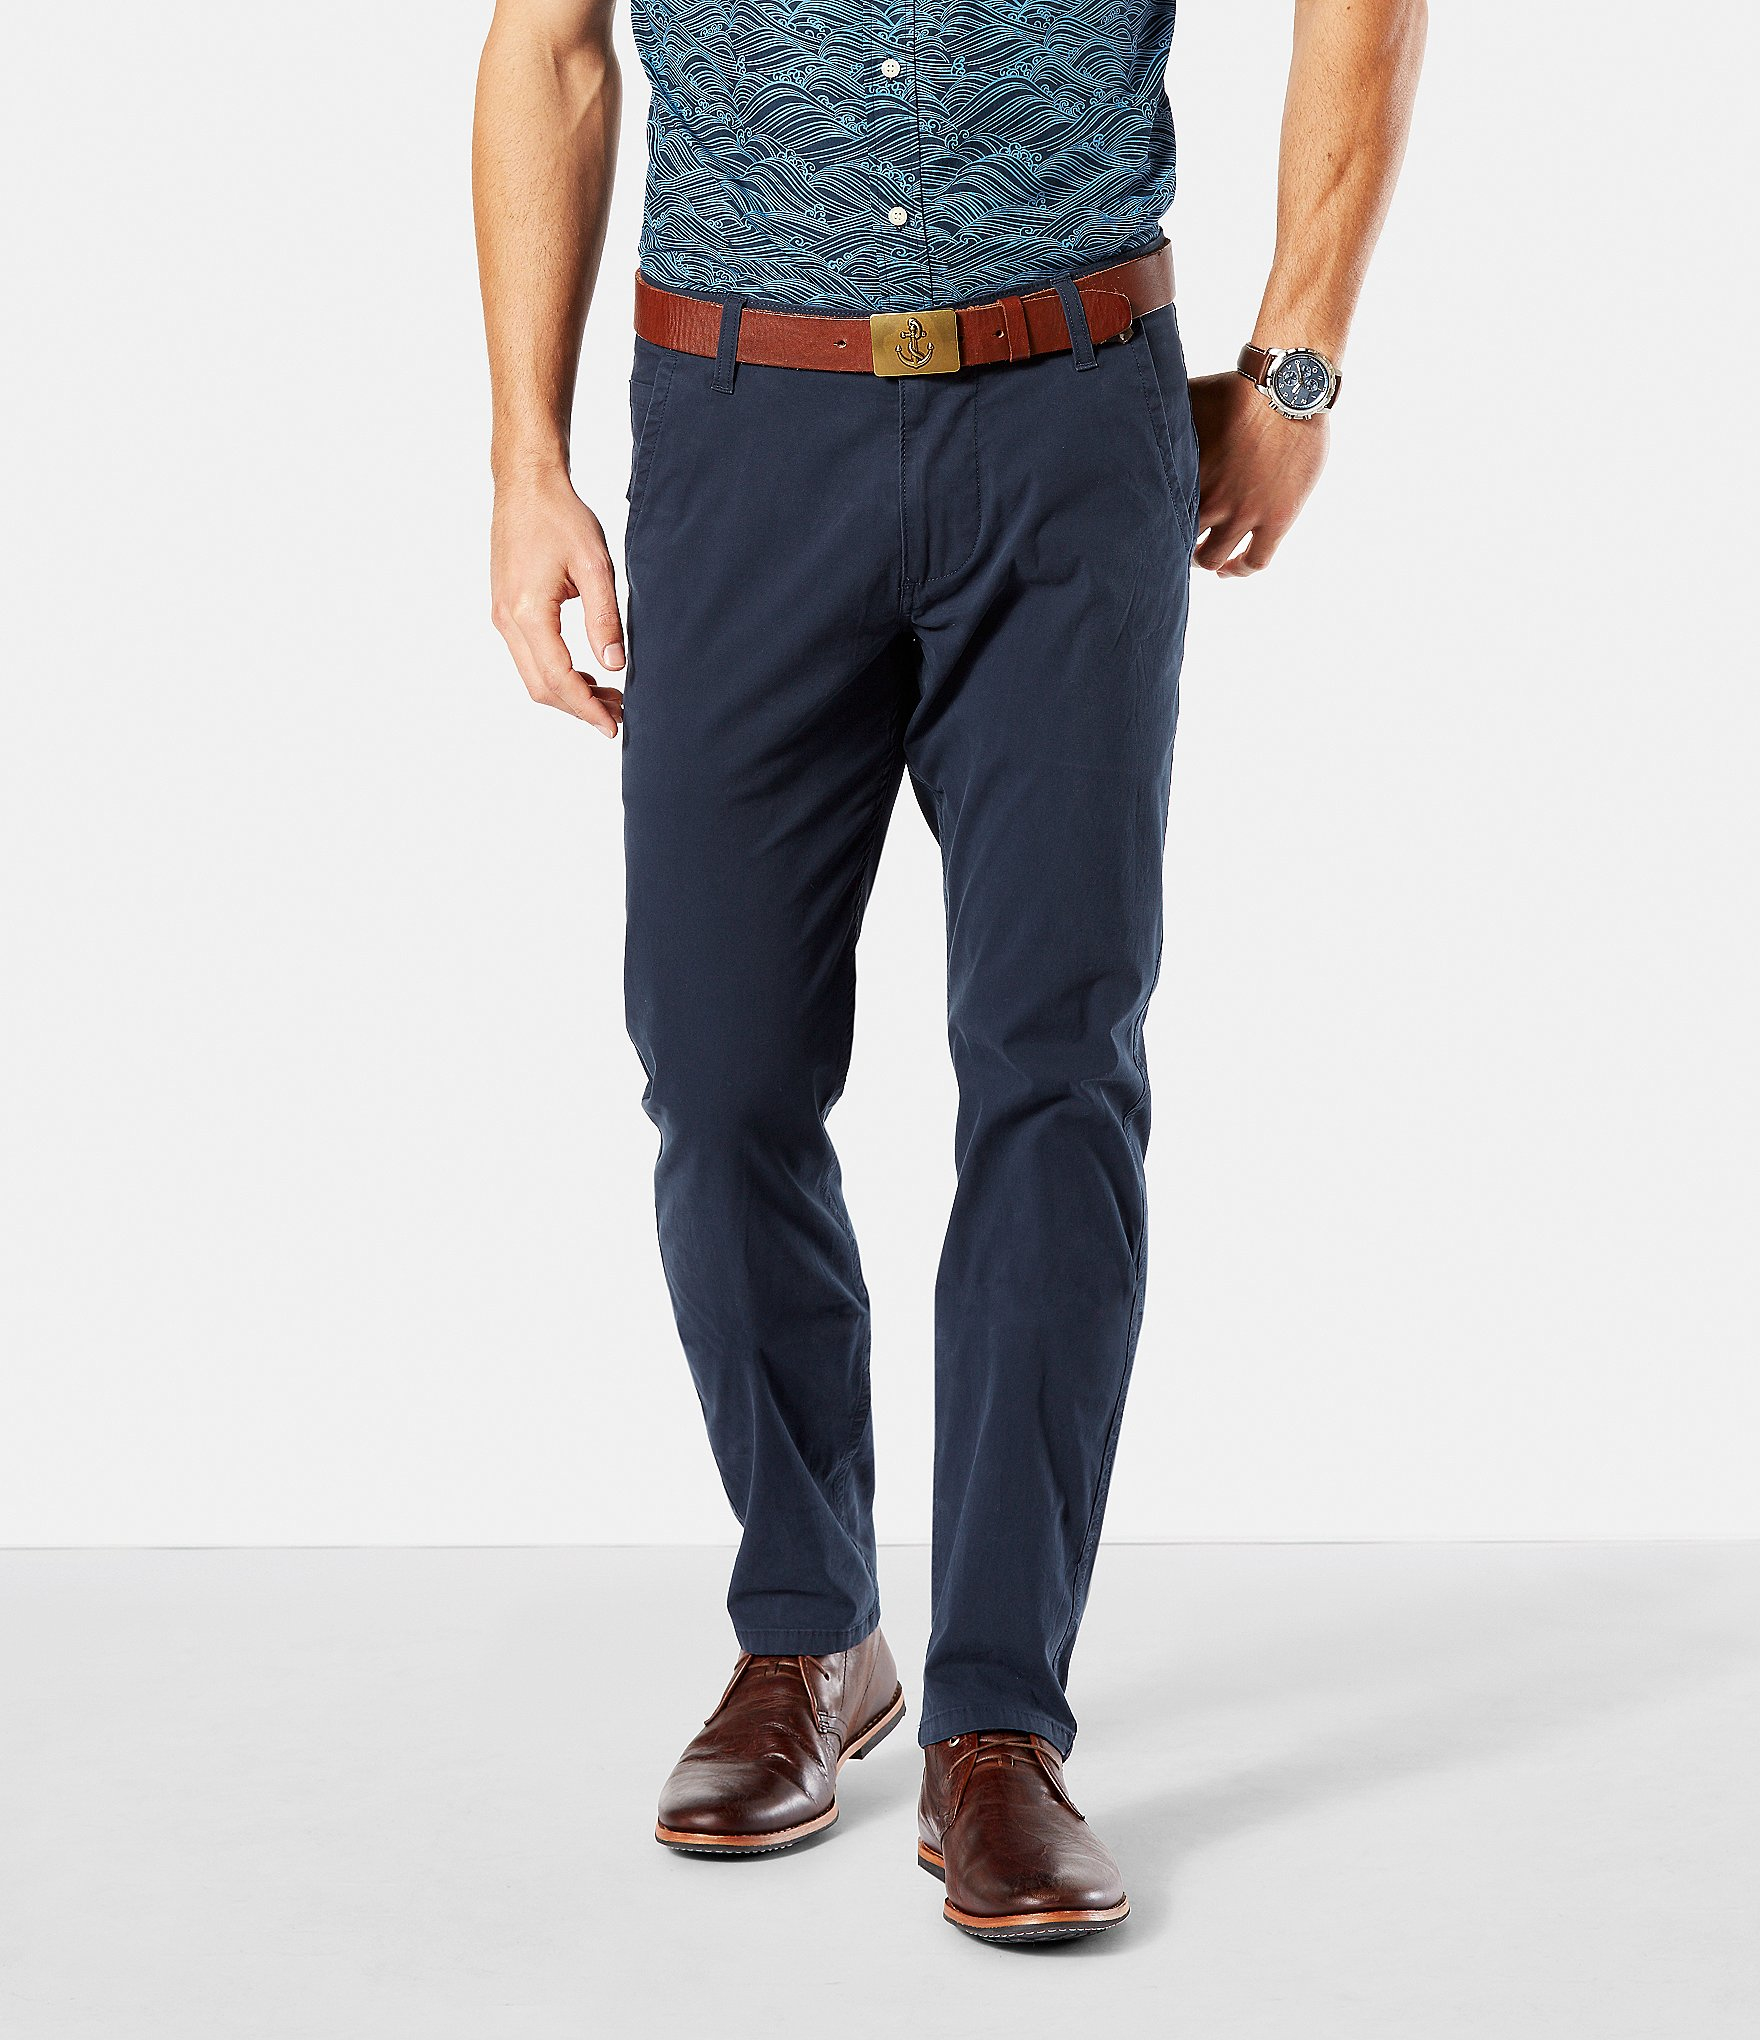 Lyst - Dockers Alpha Khaki Slim Tapered Stretch Twill Pants in Blue for Men